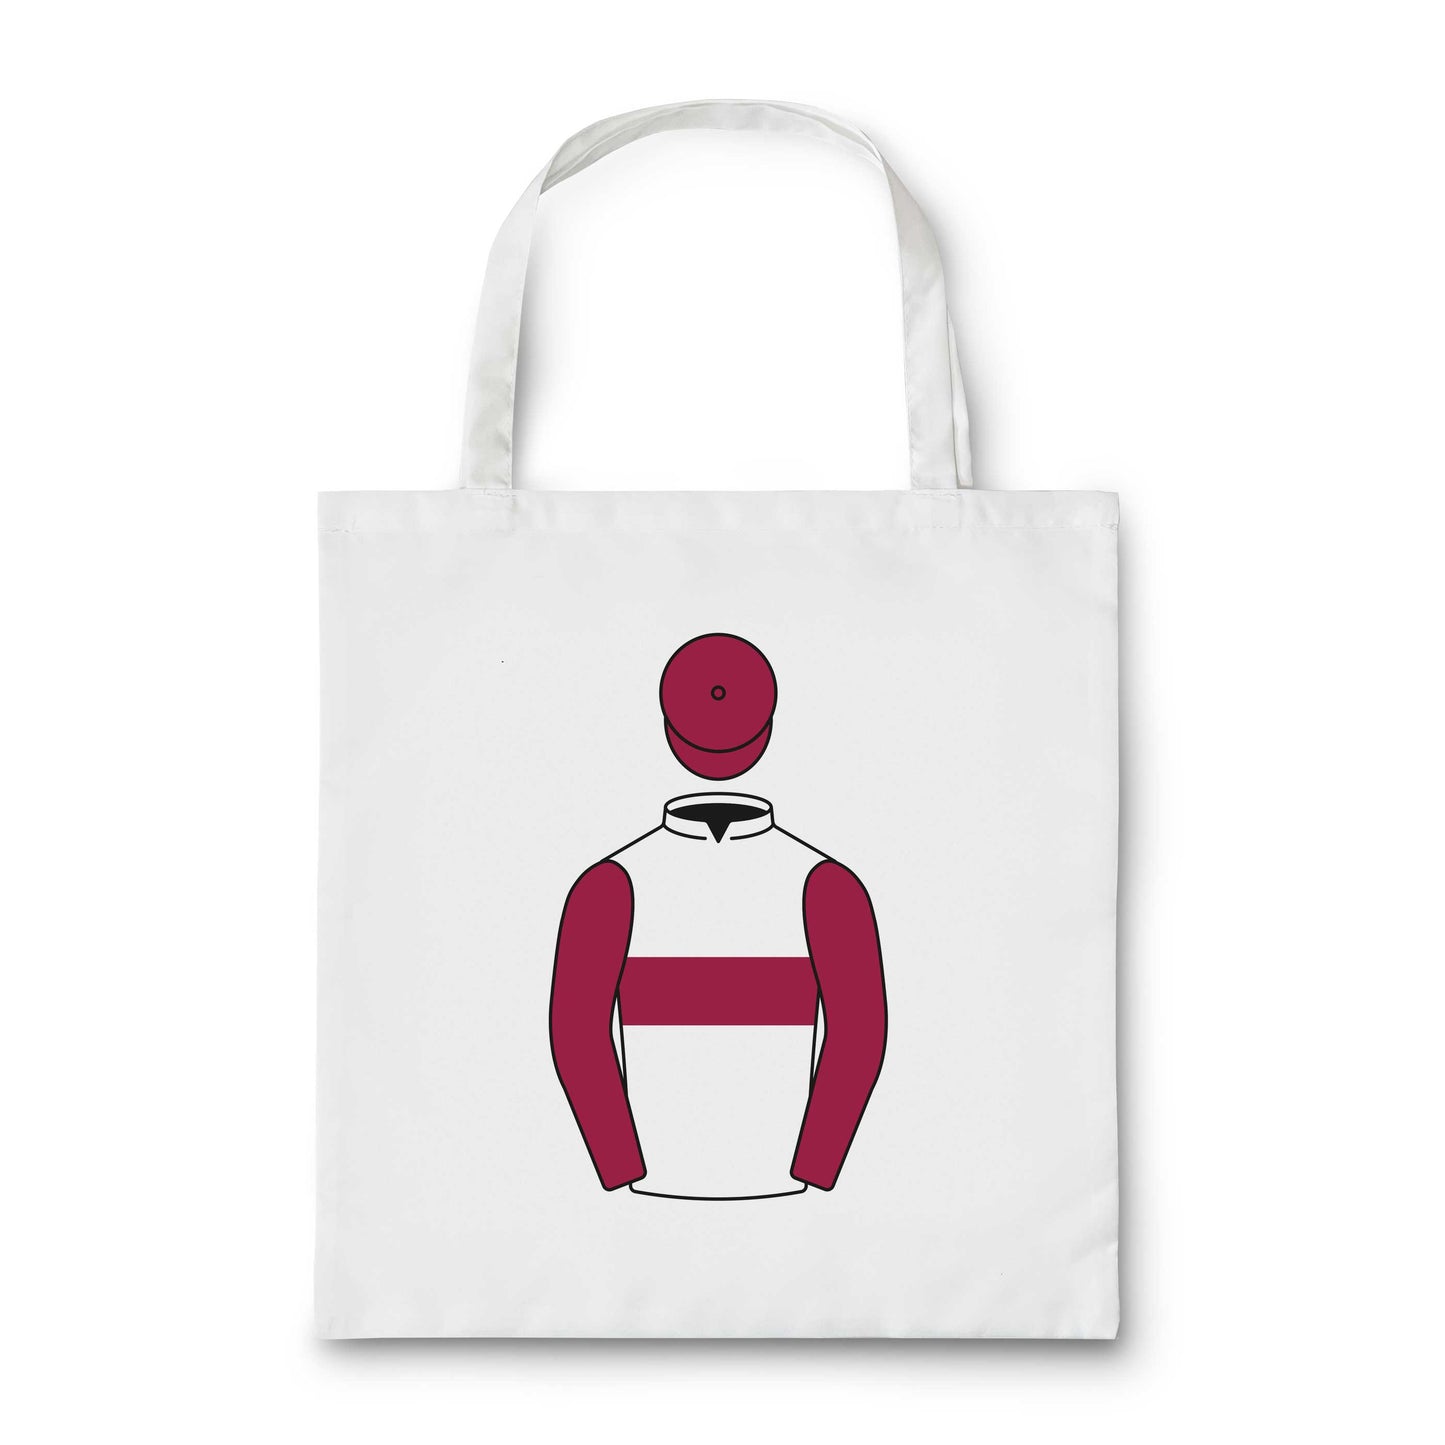 L Fell Tote Bag - Tote Bag - Hacked Up